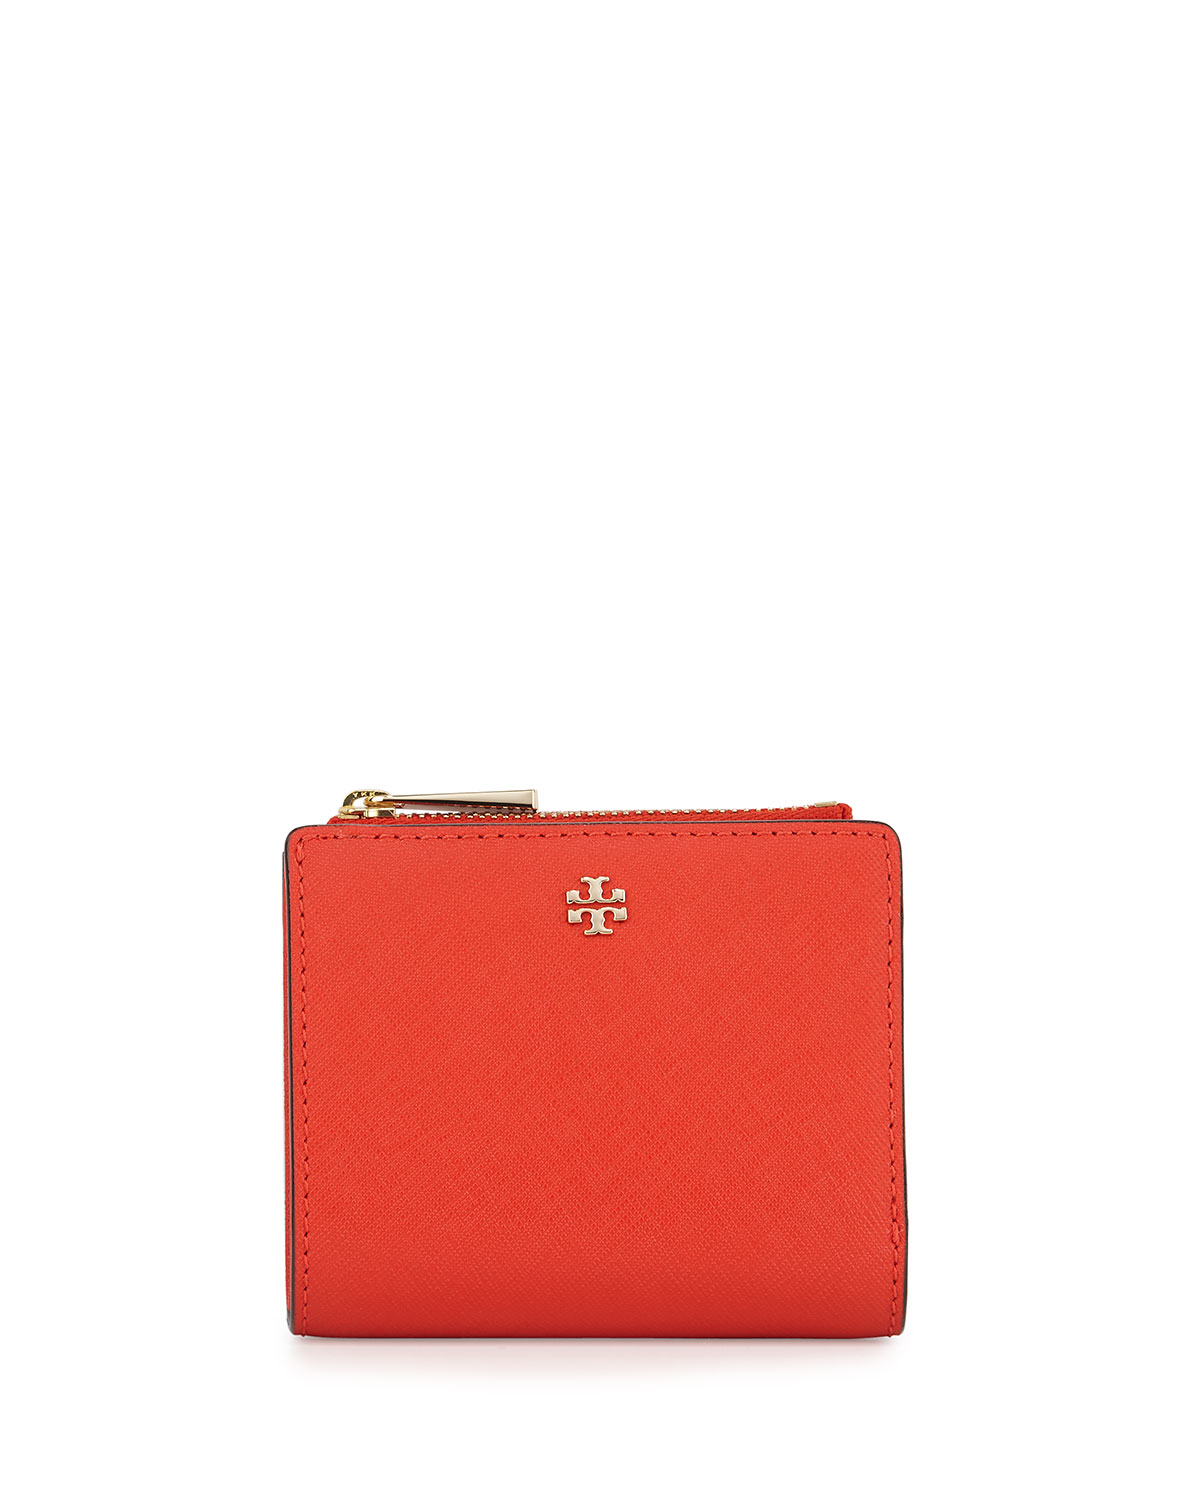 Tory burch Robinson Leather Mini Wallet in Red | Lyst